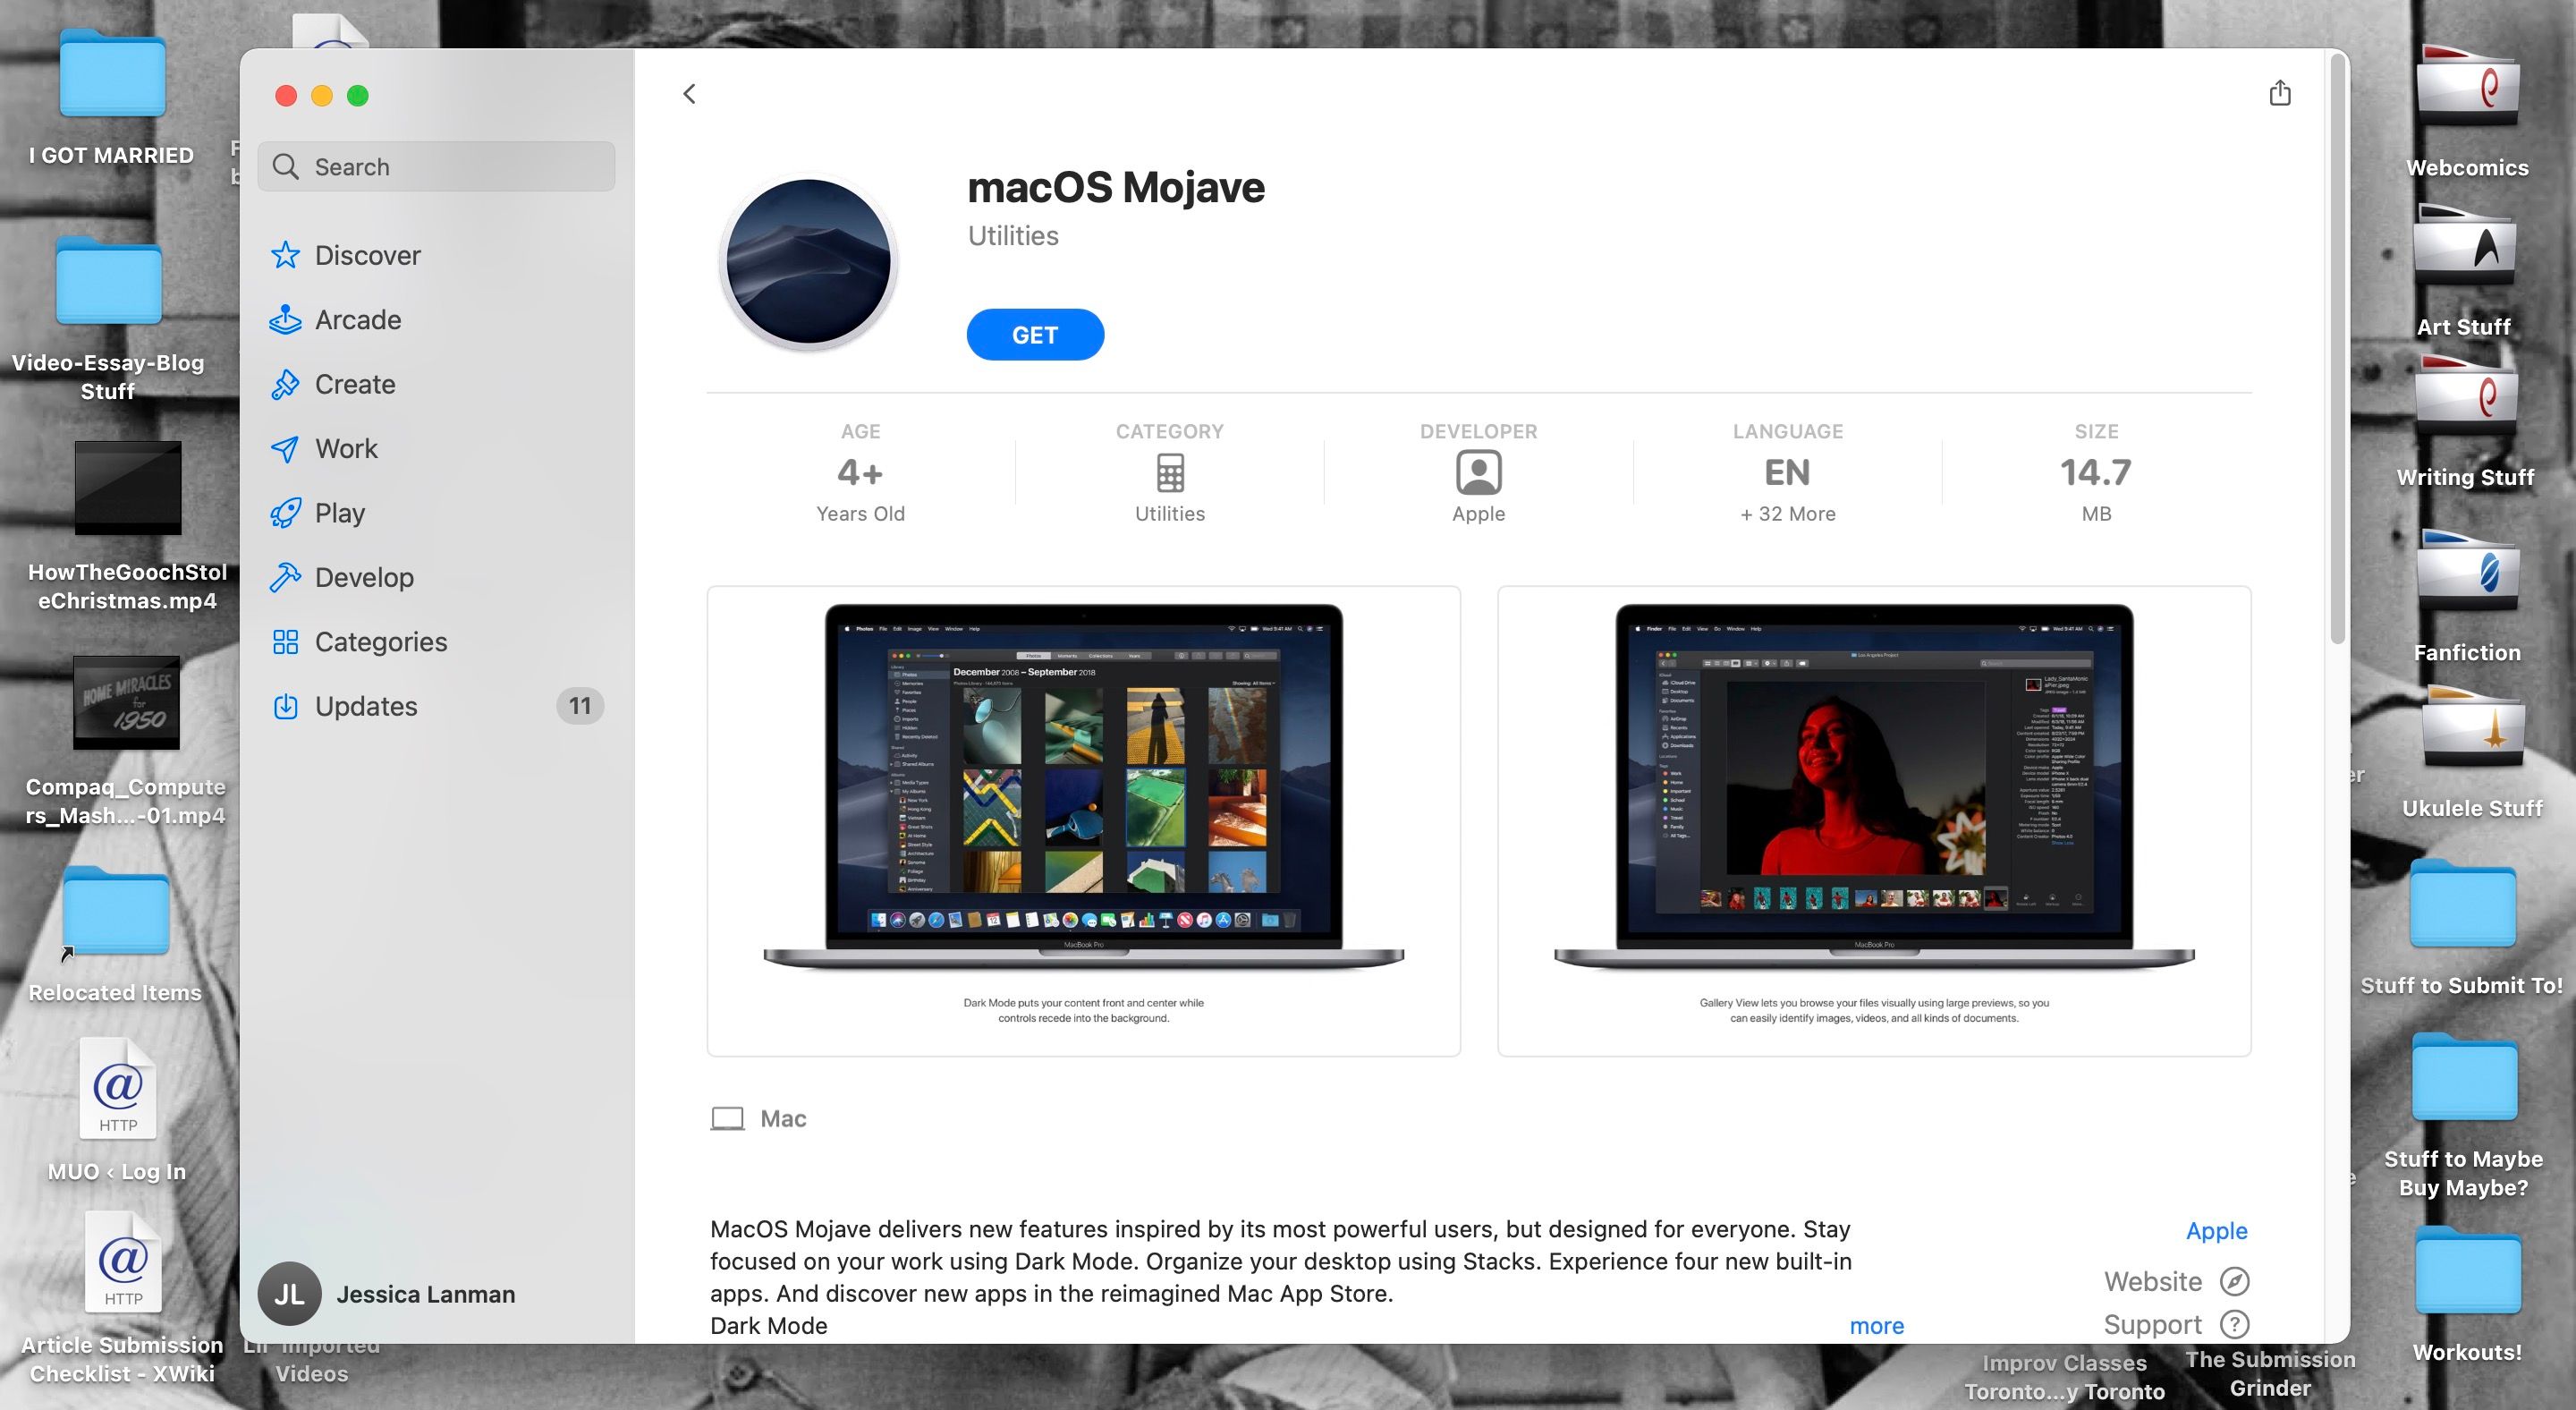 macOS Mojave download page in the Mac App Store